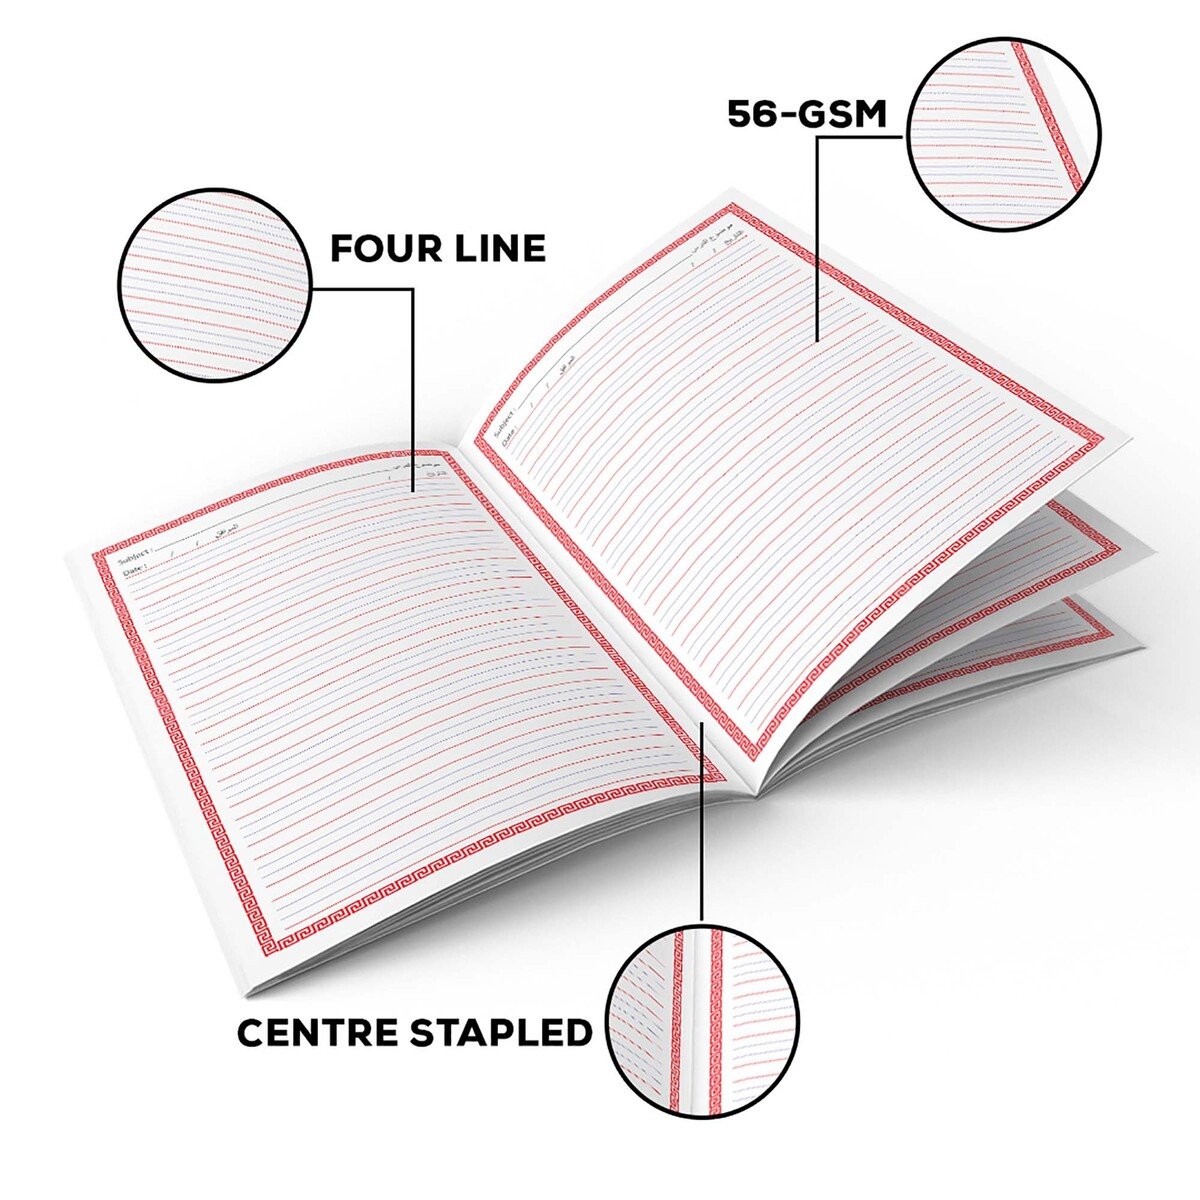 Classmate Exercise Book Centre Stapled 220x160mm 56-GSM 4 Line (Arabic) 200 Pages Assorted